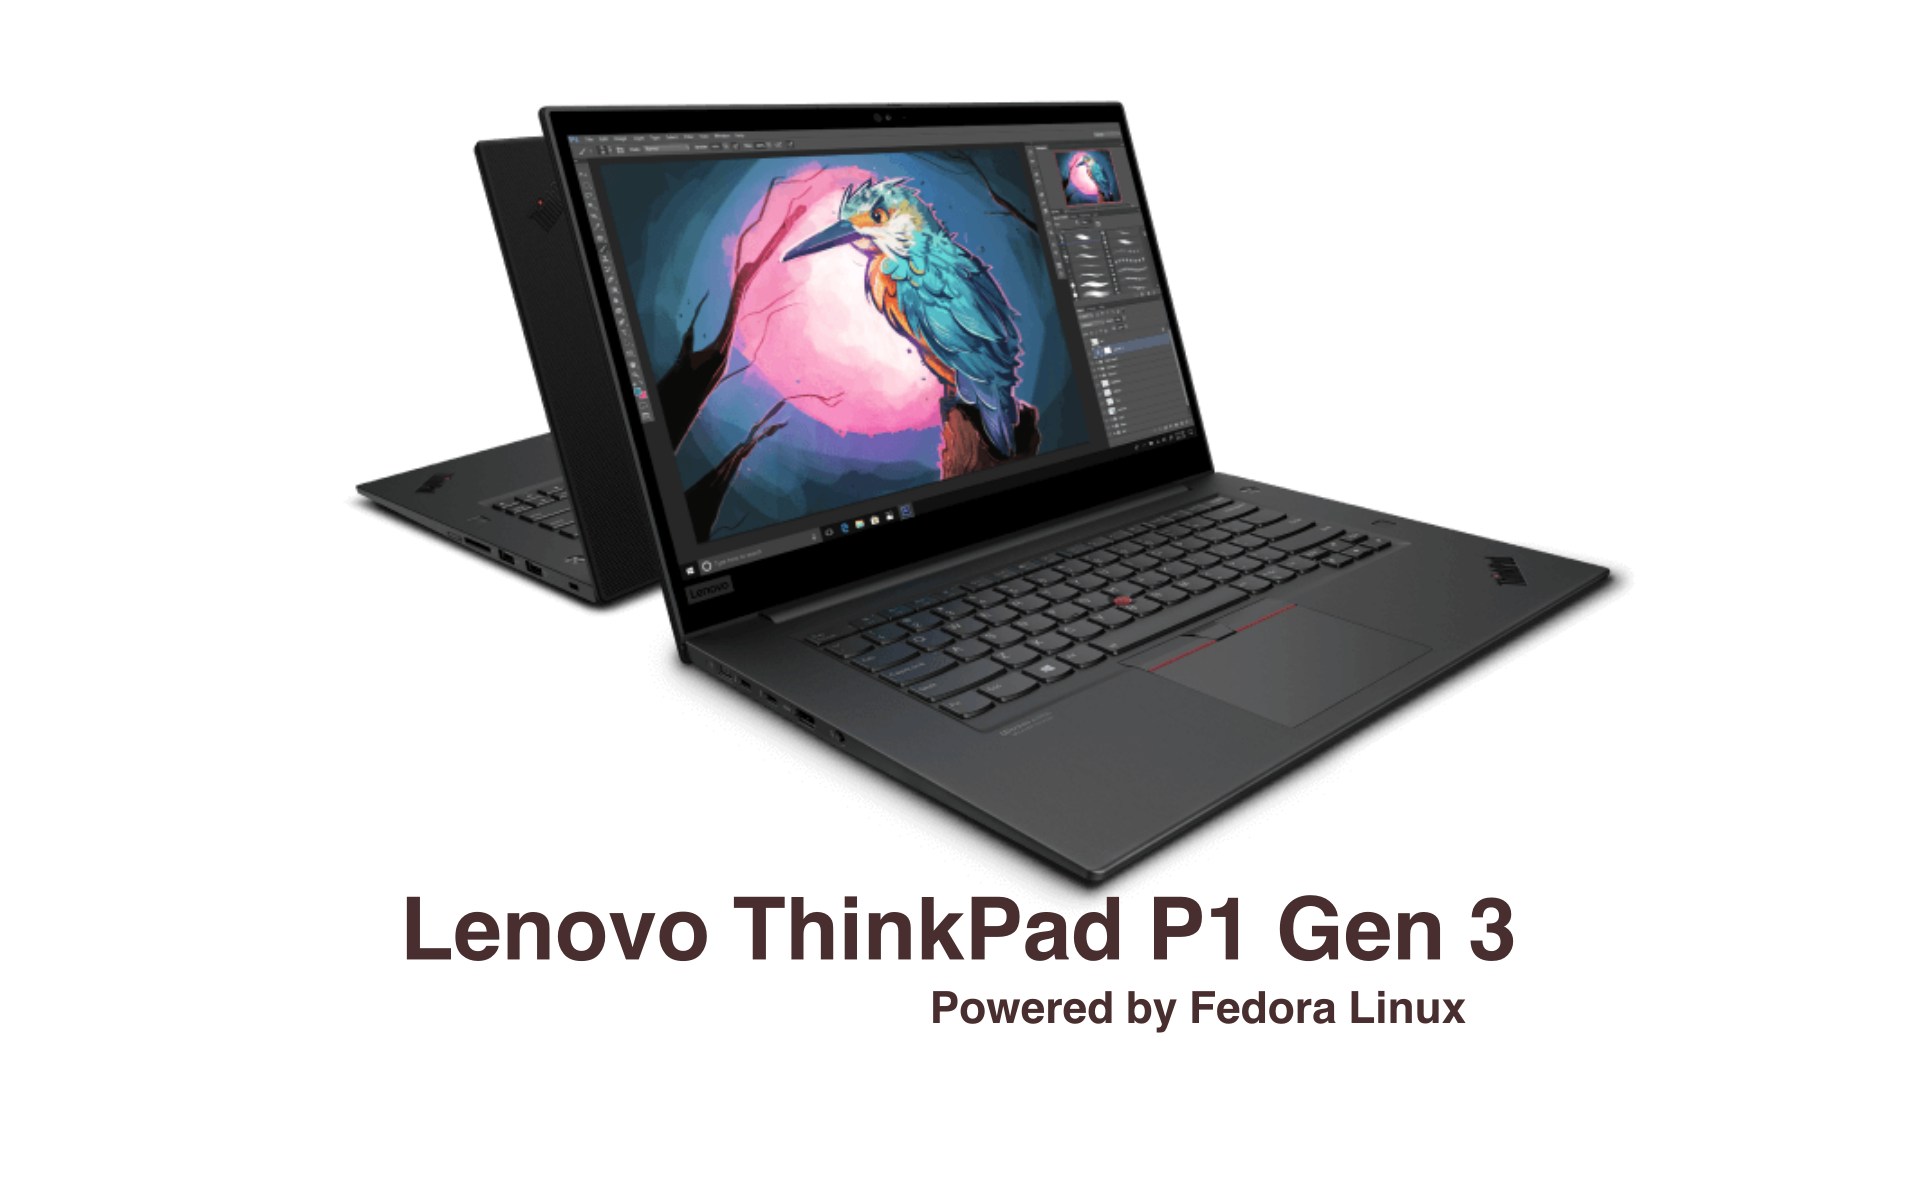 Lenovo ThinkPad P1 Gen 3 Laptop Is Now Available with Fedora Linux